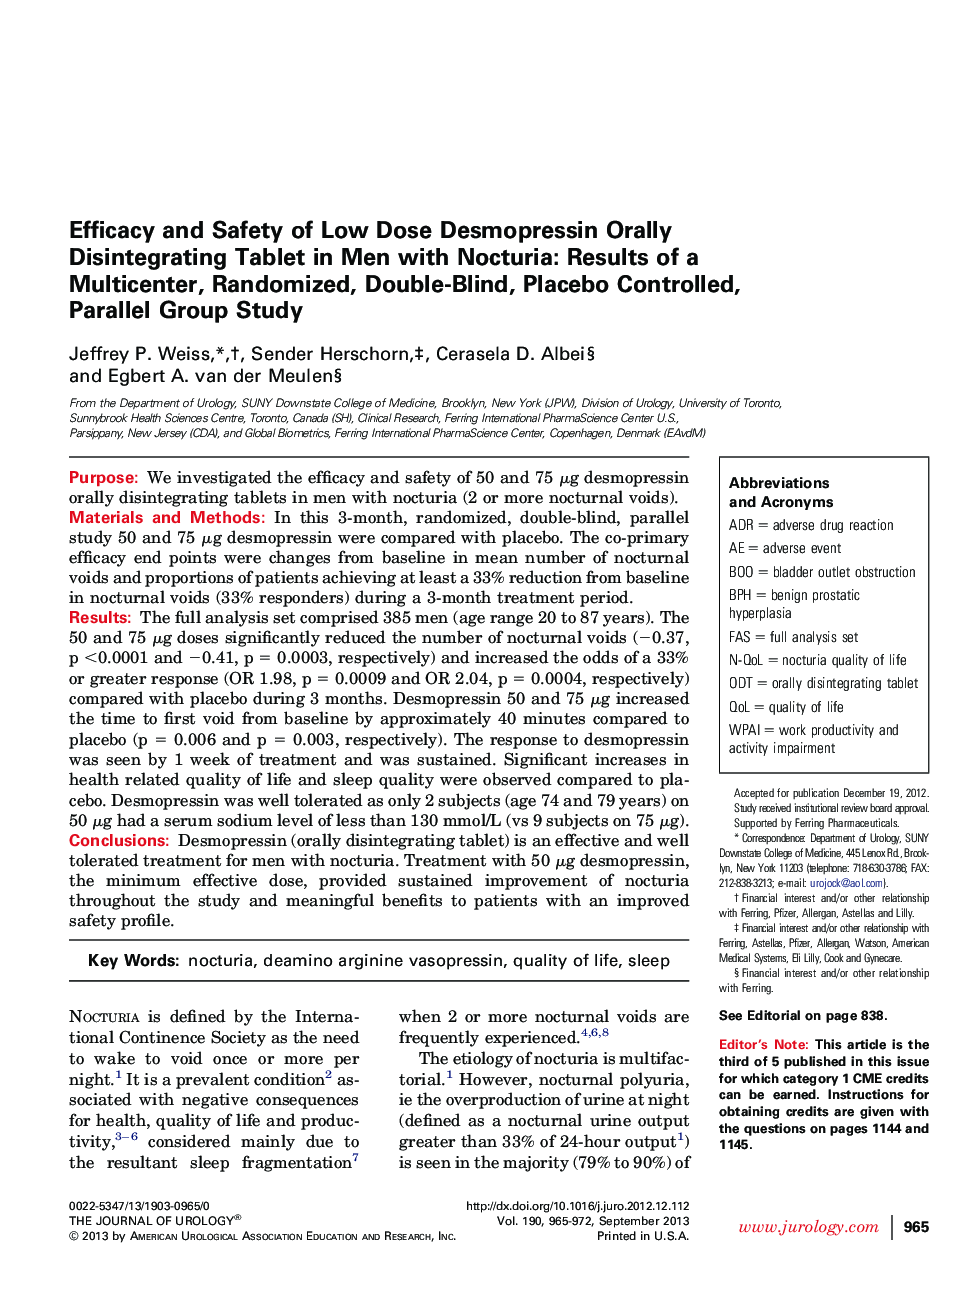 Efficacy and Safety of Low Dose Desmopressin Orally Disintegrating Tablet in Men with Nocturia: Results of a Multicenter, Randomized, Double-Blind, Placebo Controlled, Parallel Group Study 